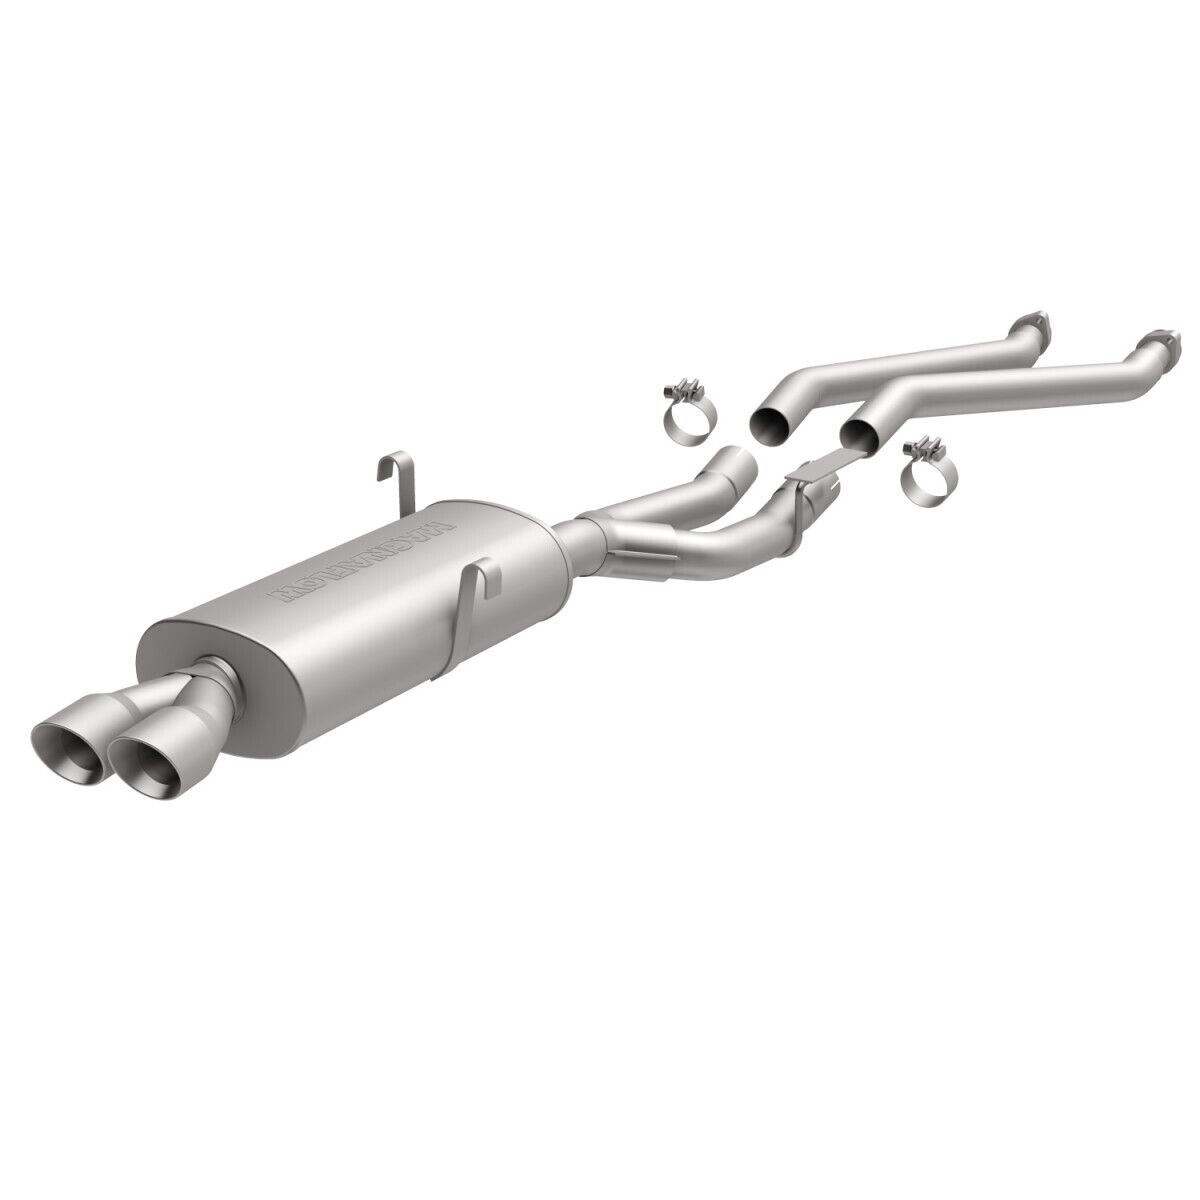 16535 Magnaflow Exhaust System for 325 E30 3 Series BMW 325i 325is 325iX 88-91